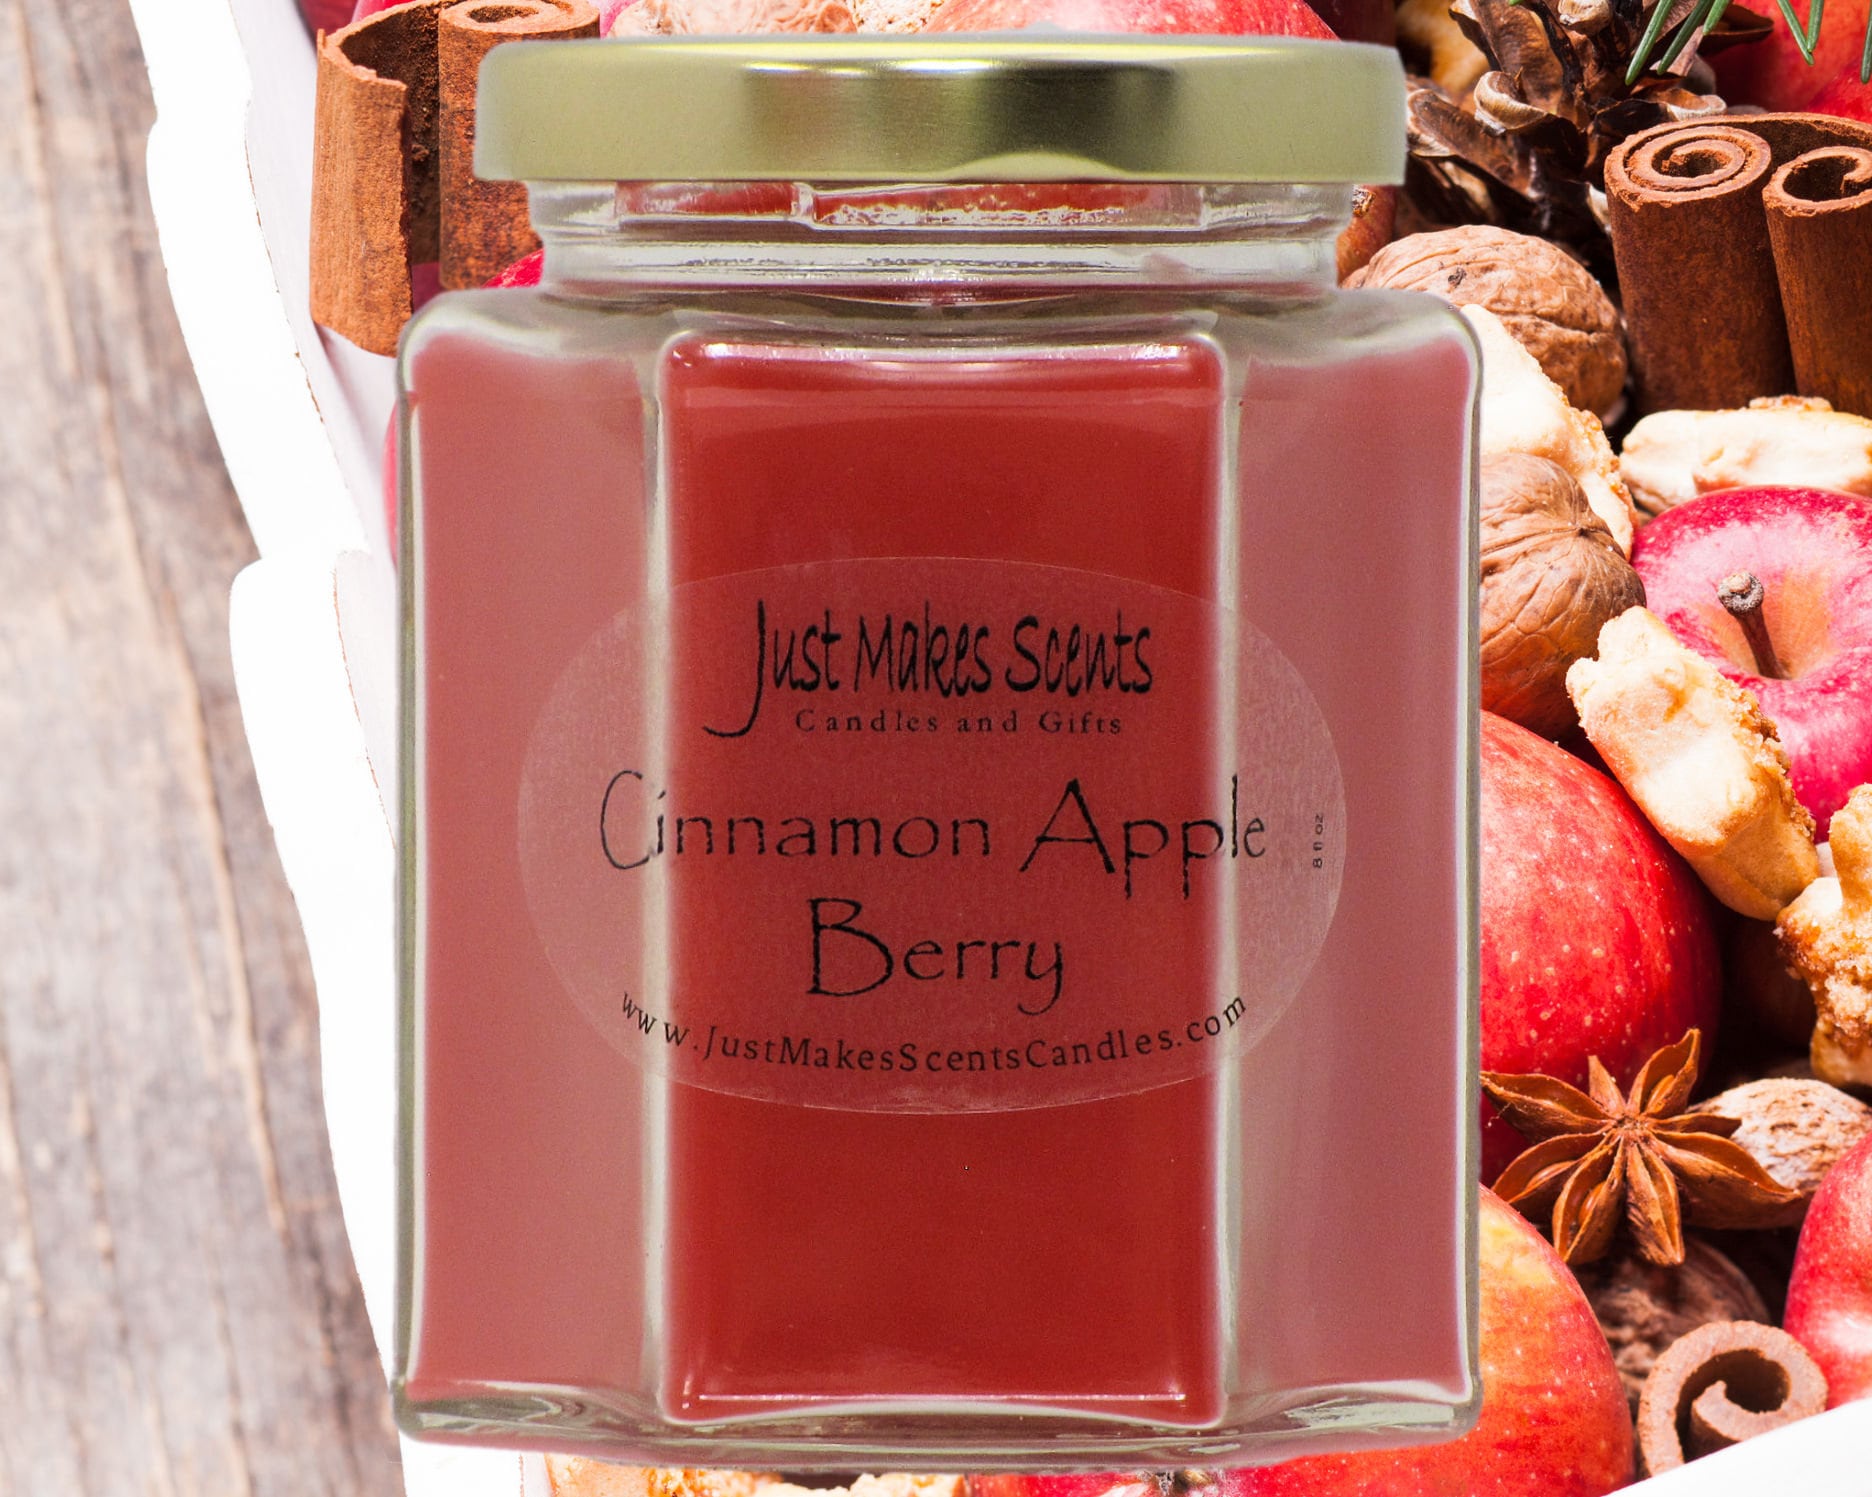 Cinnamon Apple Berry Blended Soy Candle - Homemade